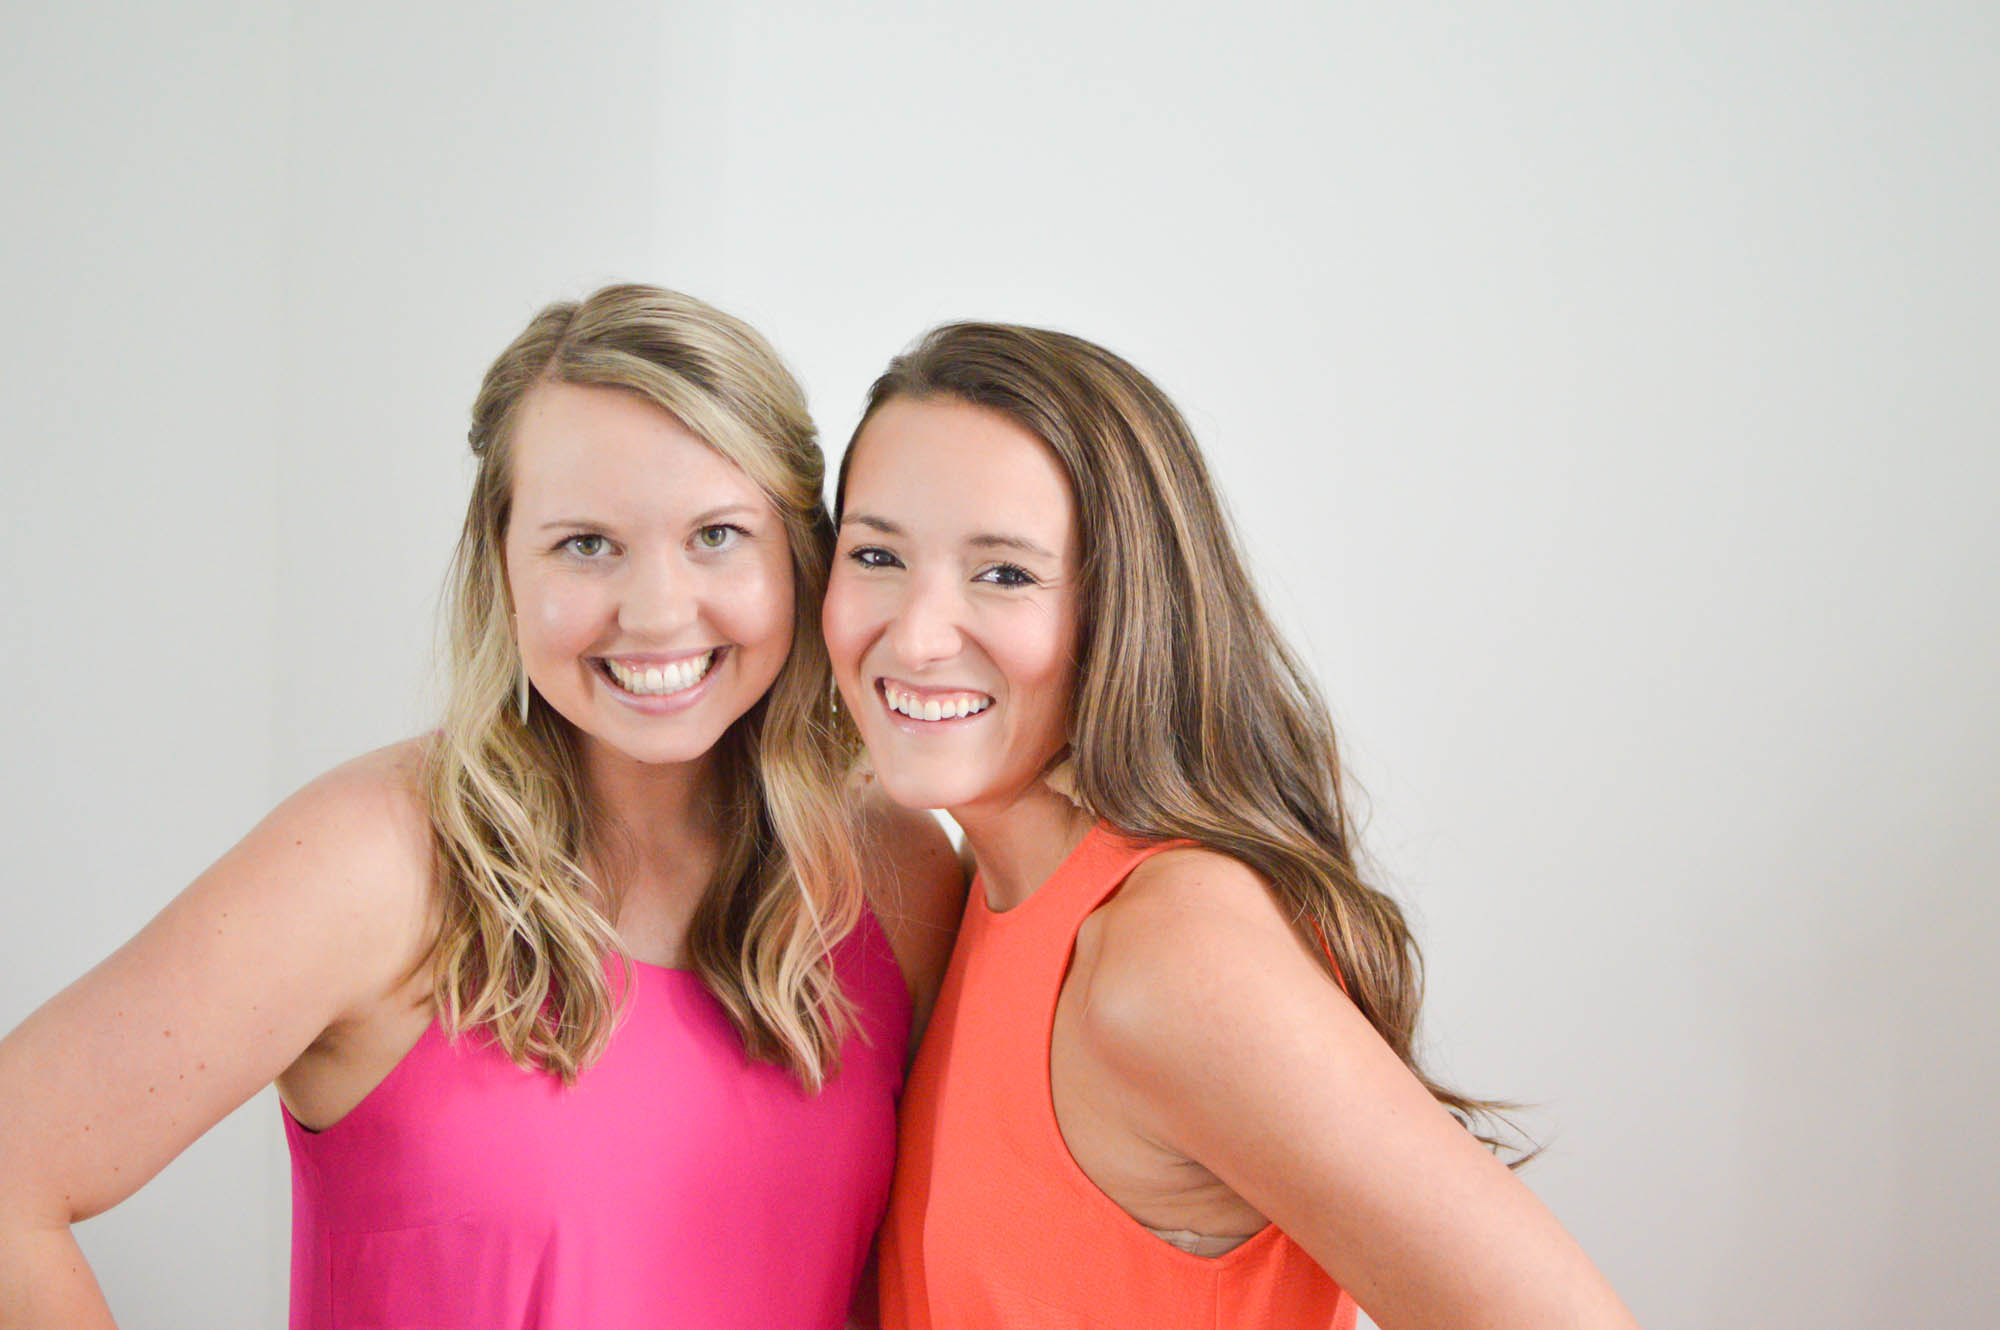 Hiring a Biz Coach: A Candid Conversation Business Coaching on the Talking Small Business podcast with Megan Martin and Kat Schmoyer